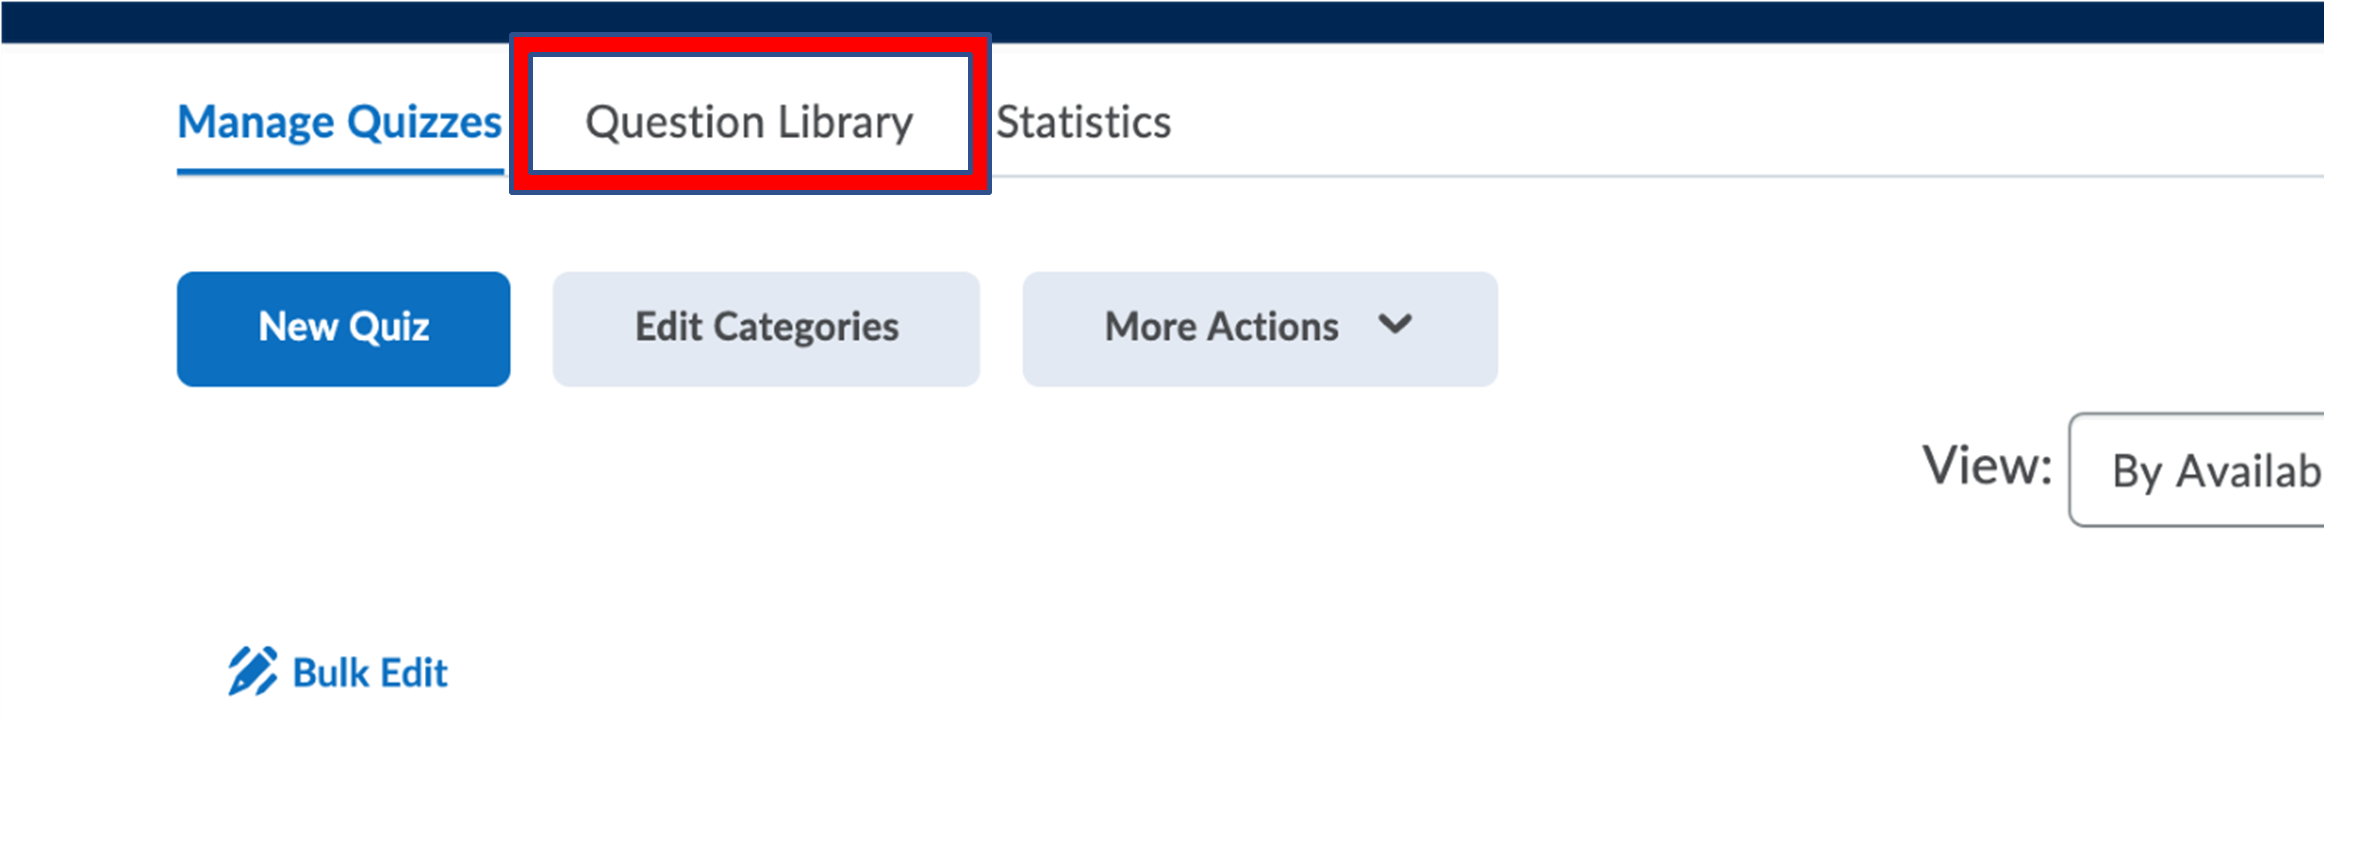 The "question library" tab is to the right of "manage quizzes" in the Quizzes tool.